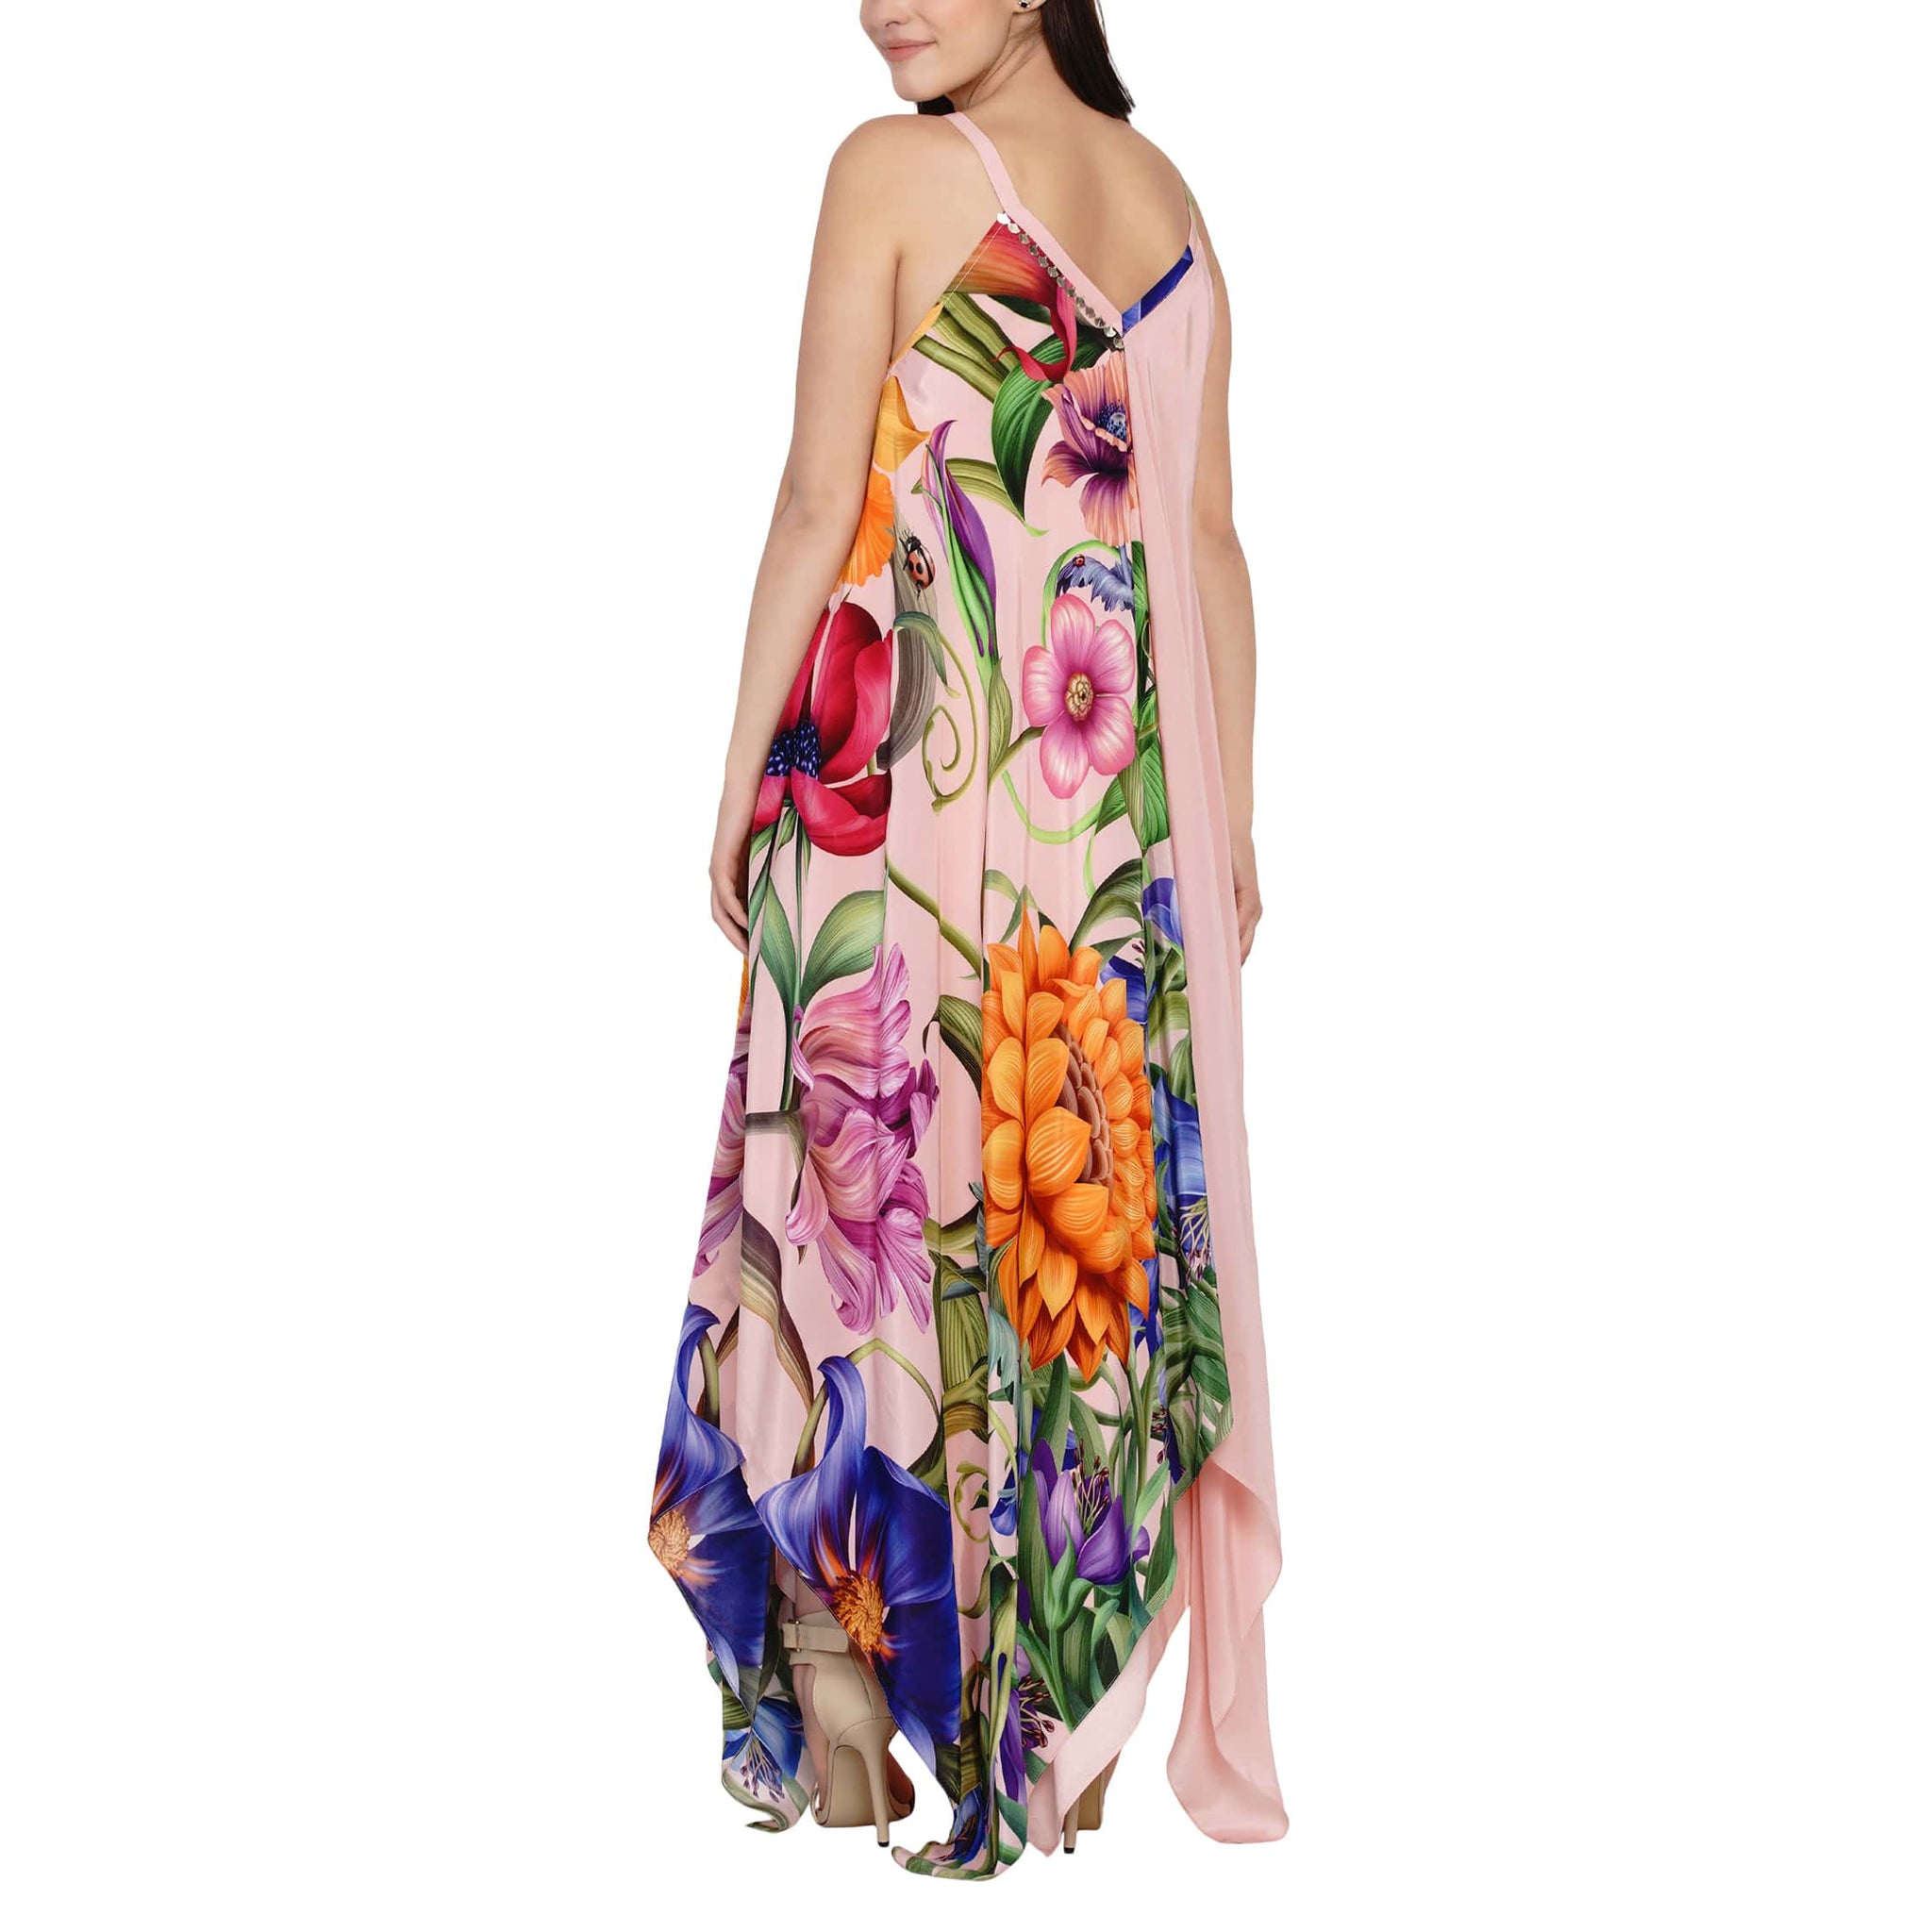 Embroidered Printed Hankerchief dress